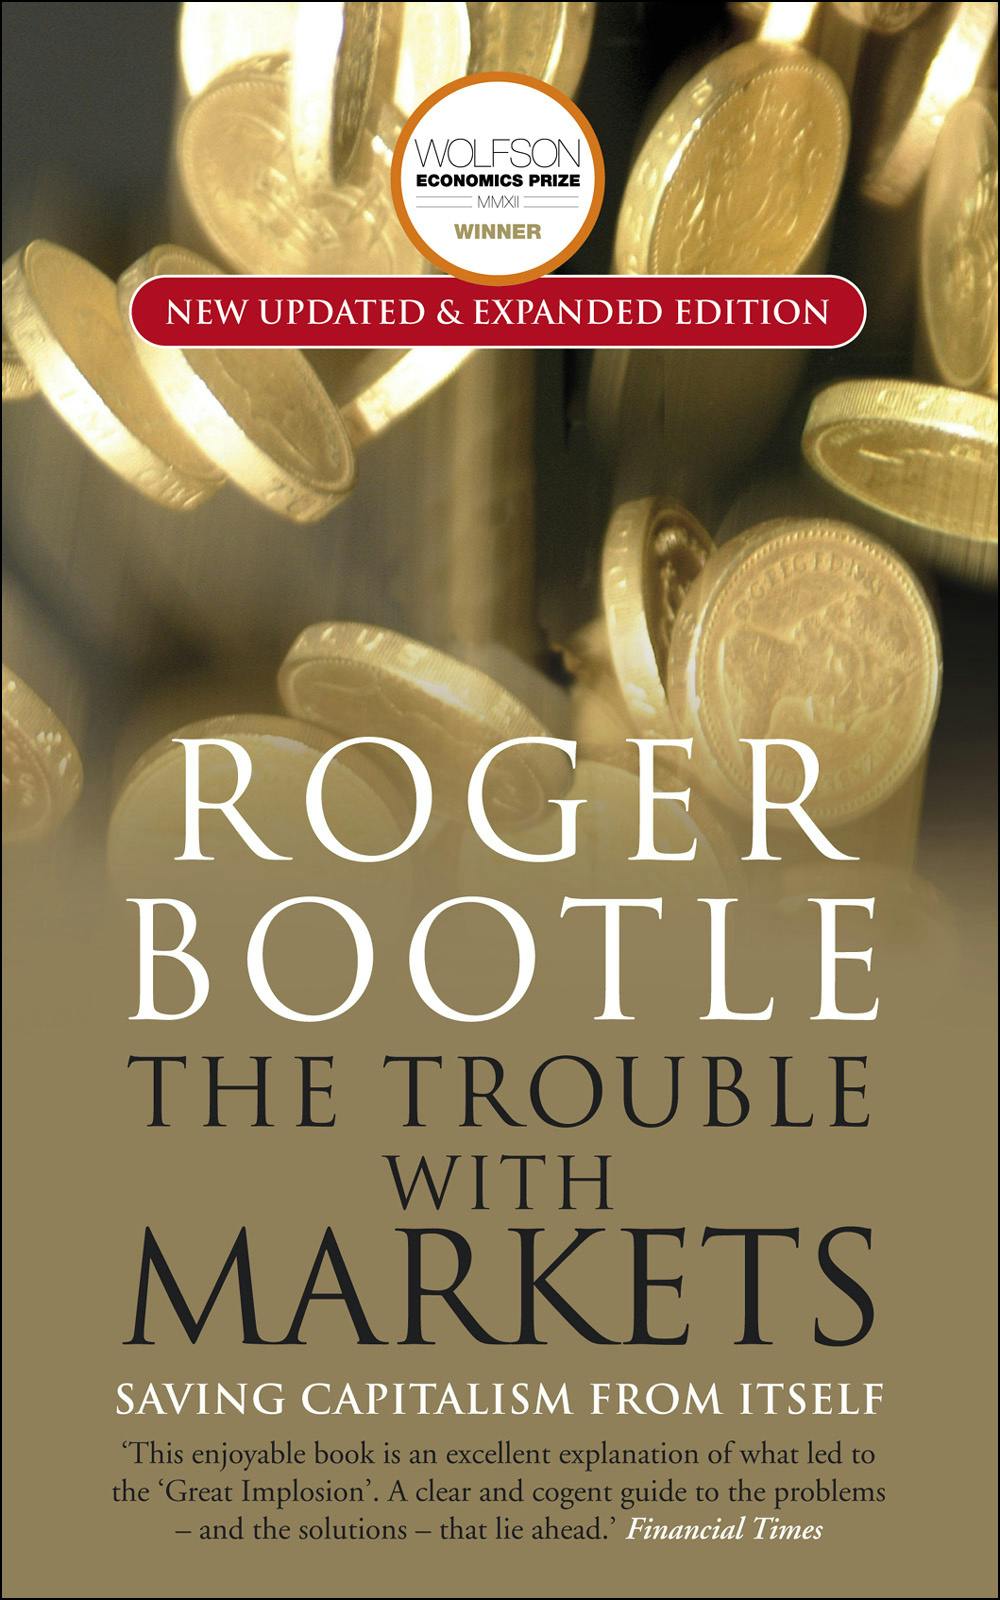 The Trouble with Markets Saving Capitalism from Itself by Roger Bootle